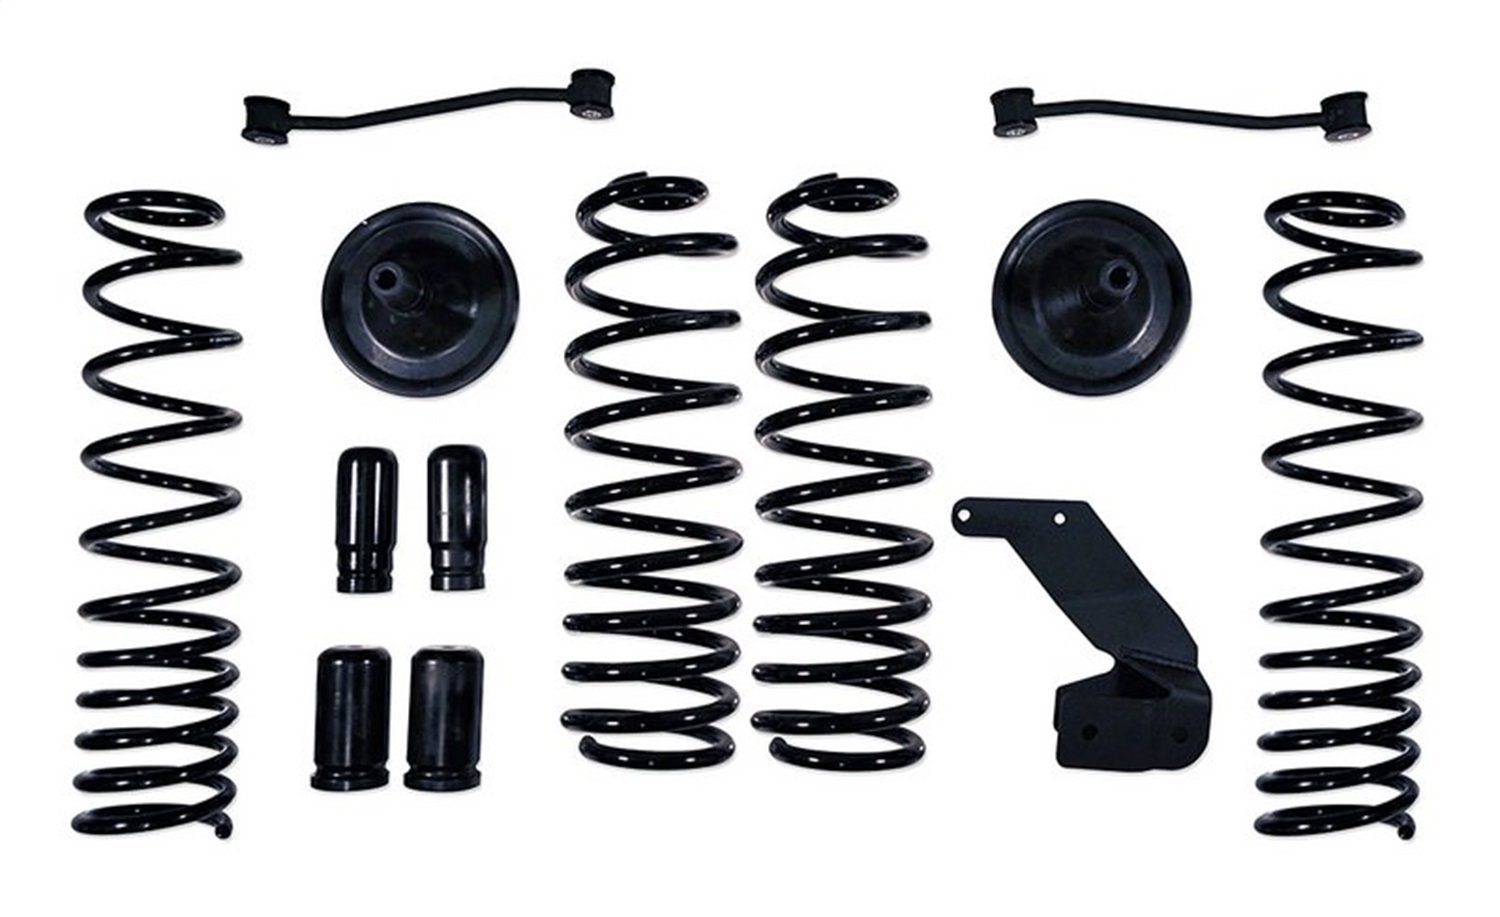 43001 Front and Rear Suspension Lift Kit, Lift Amount: 3 in. Front/2.5 in. Rear